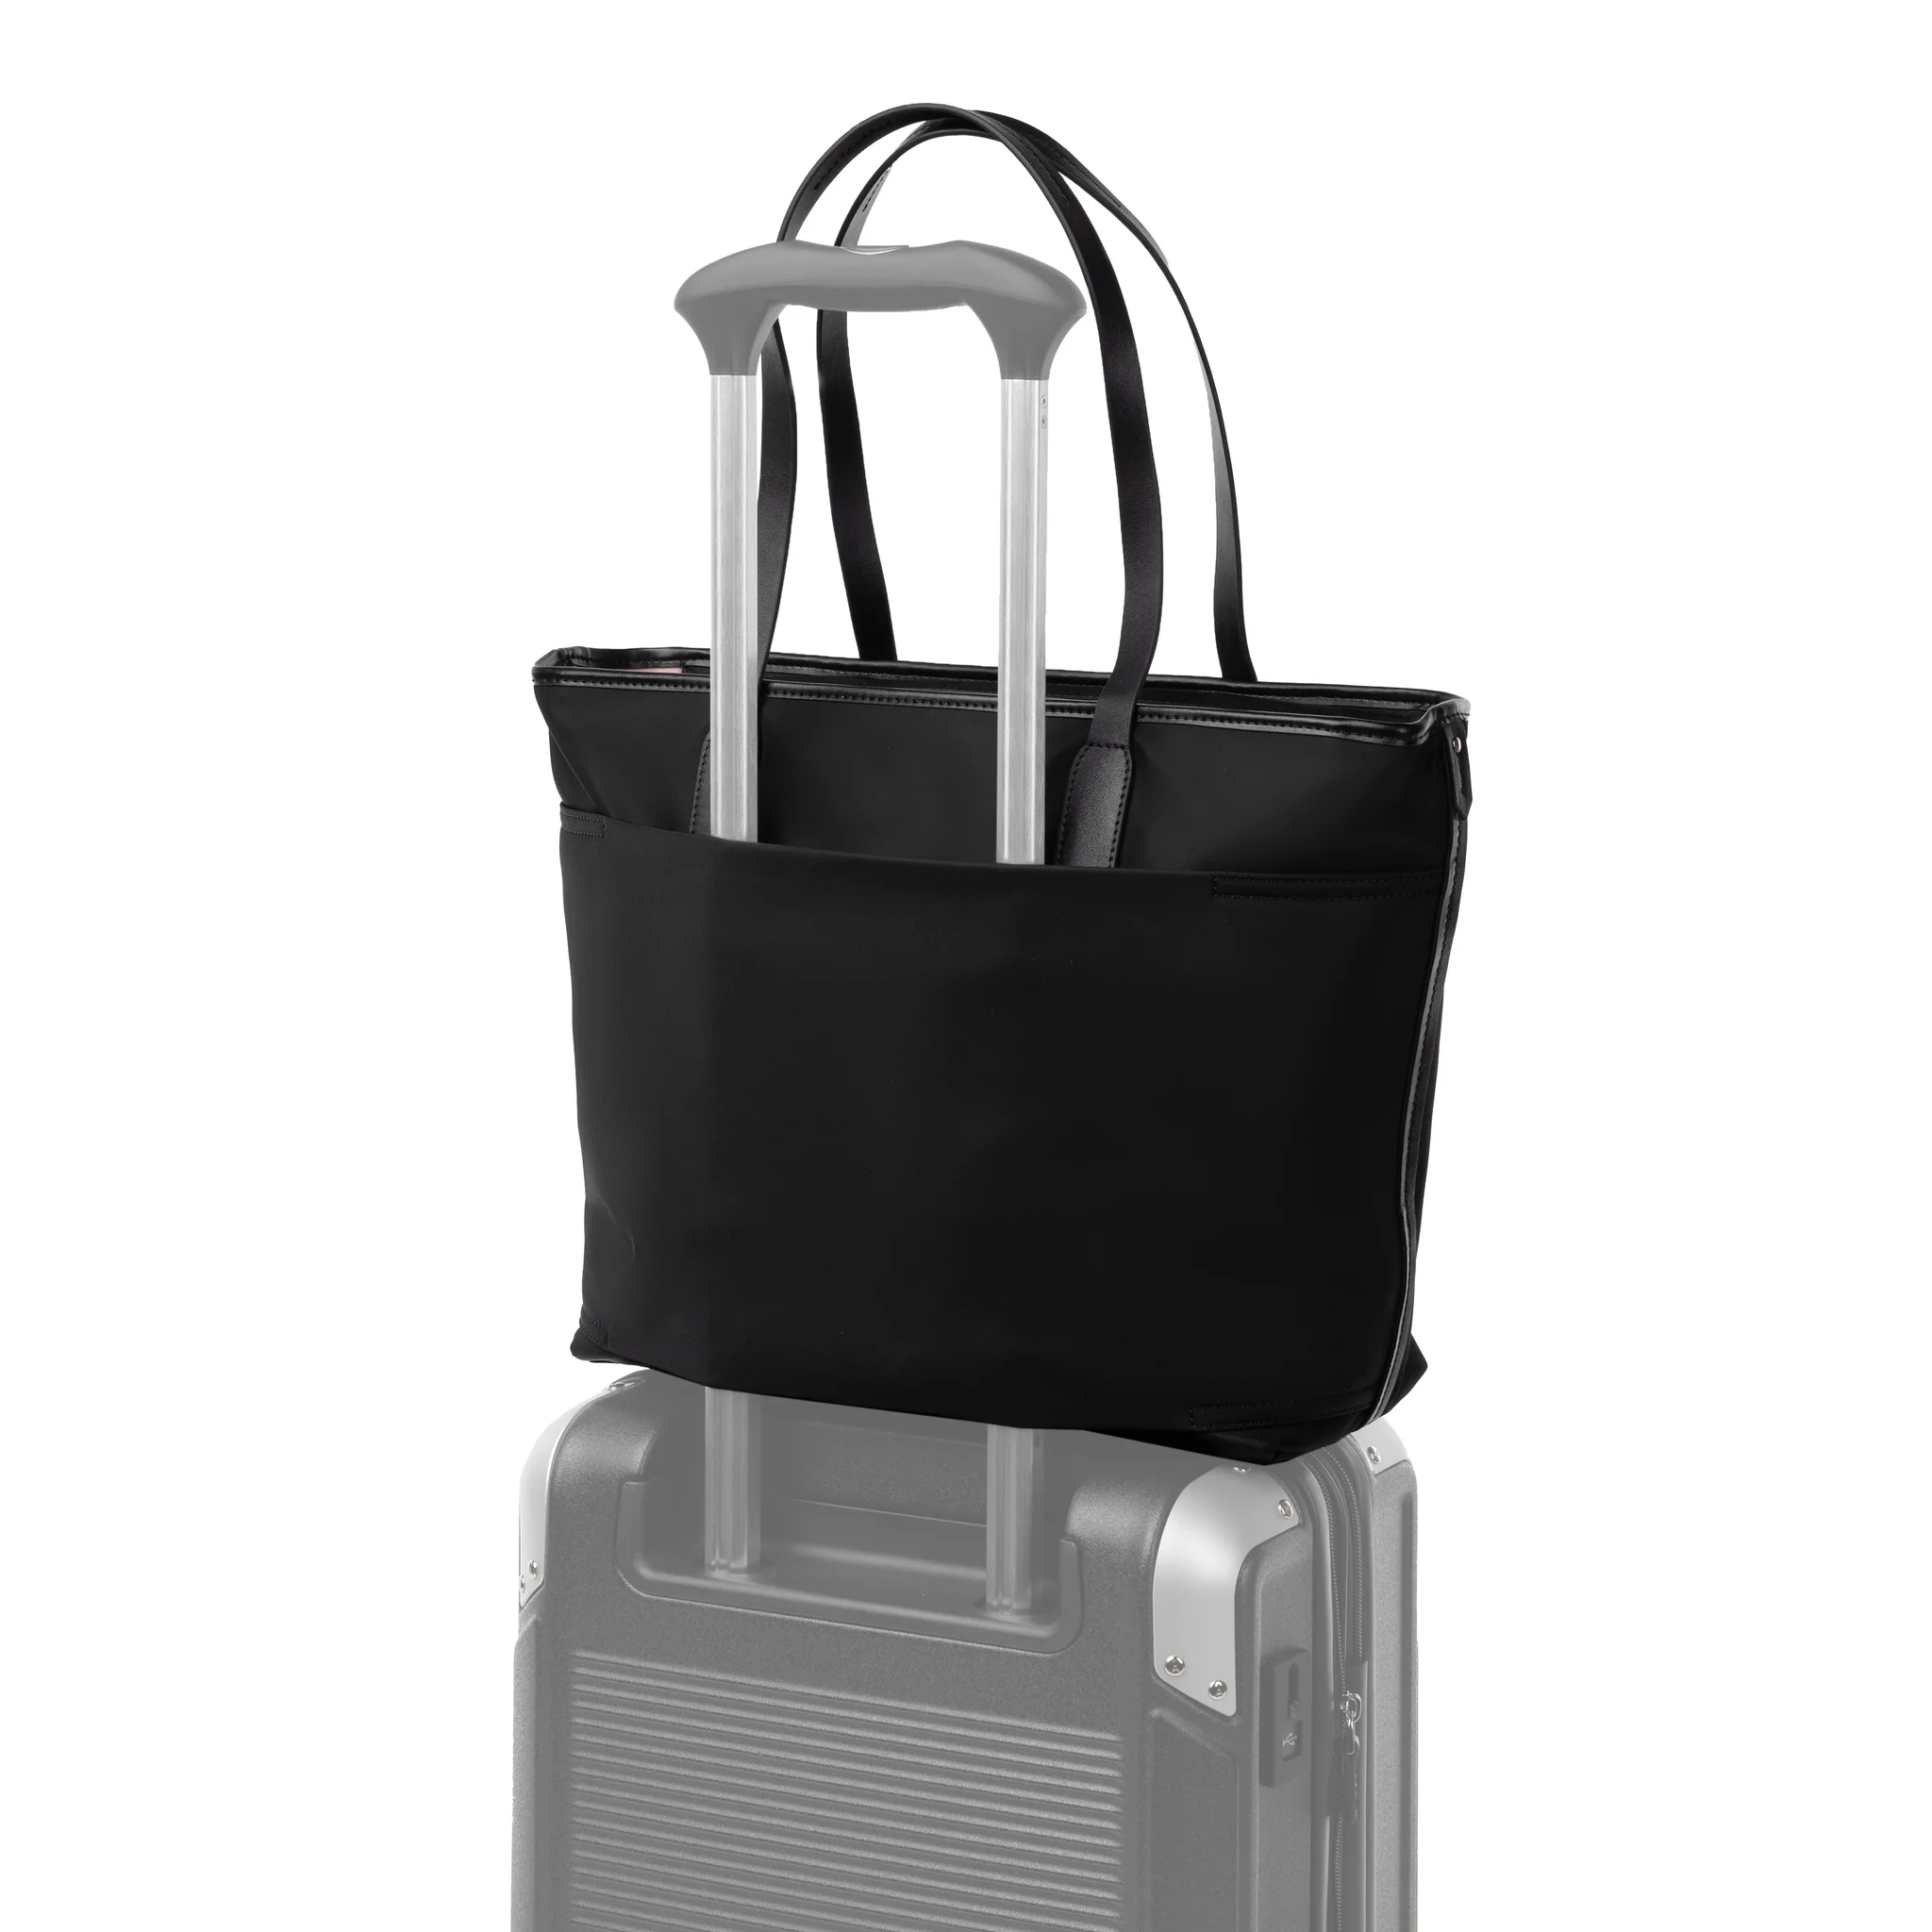 15 Best Travelpro Pathways Laptop Tote for 2023 | TouristSecrets